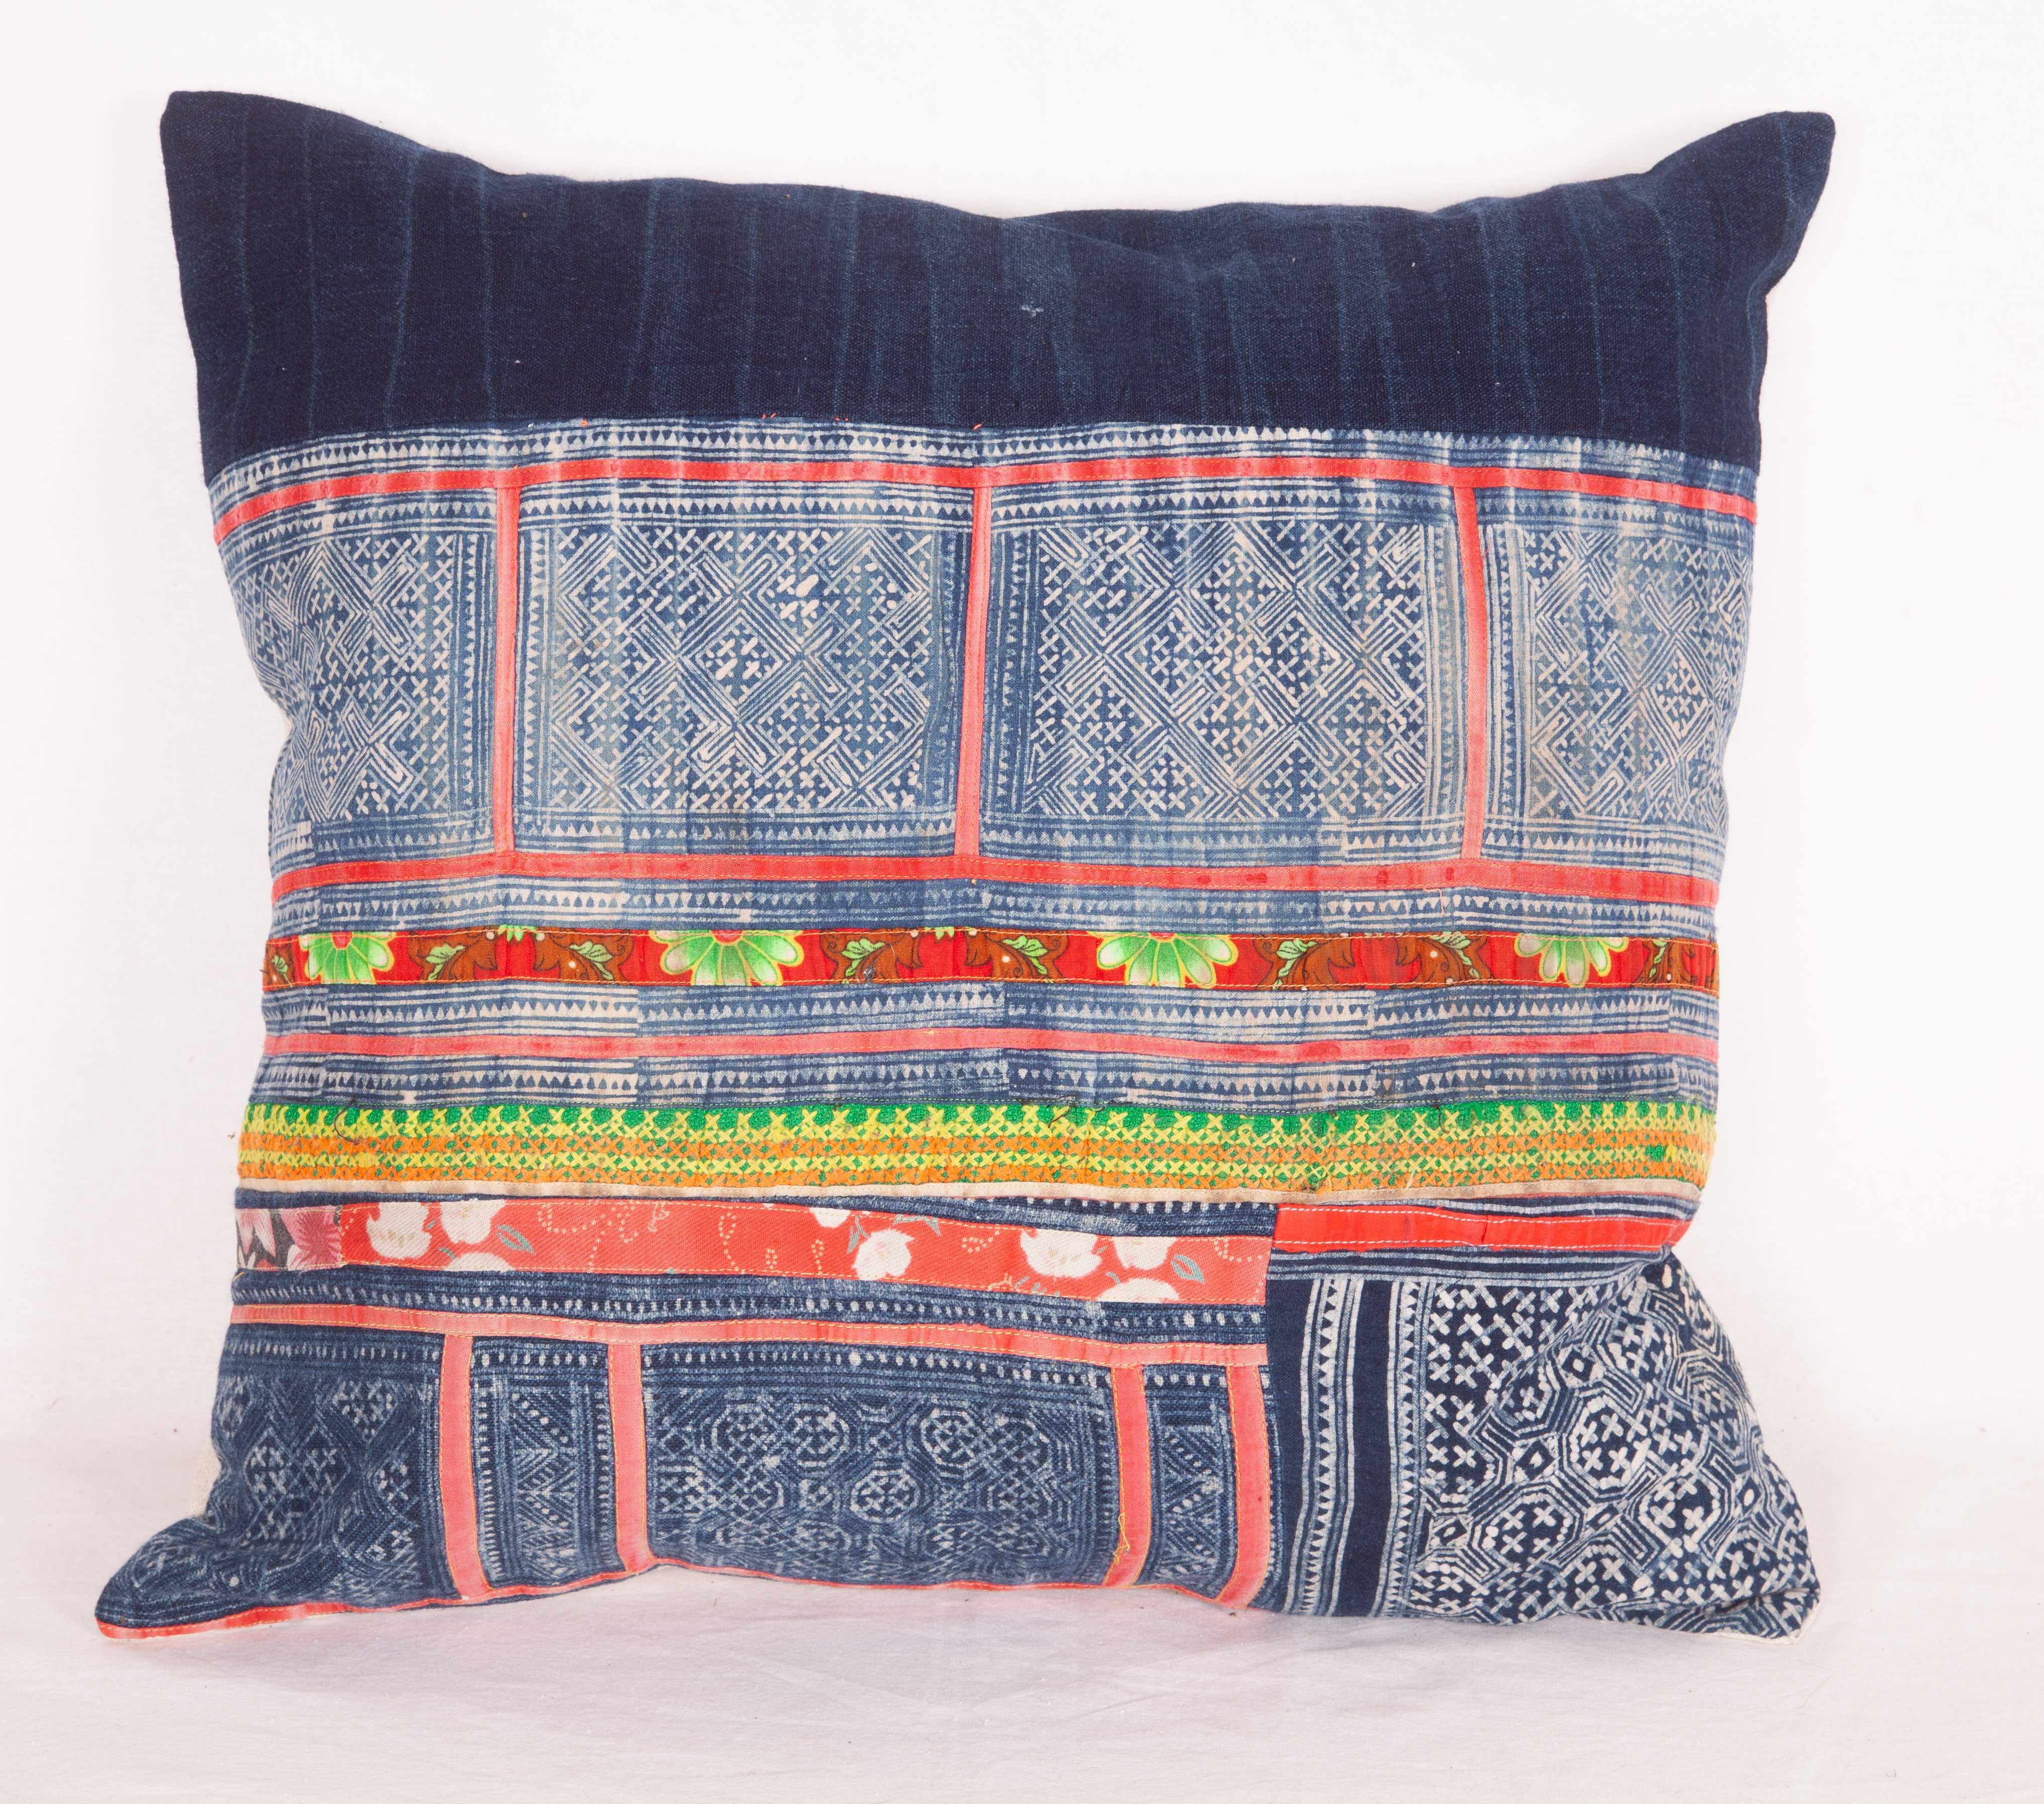 Thai Vintage Pillow Cases / Cushions Made from a Hmong Hill Tribe Batik Textile